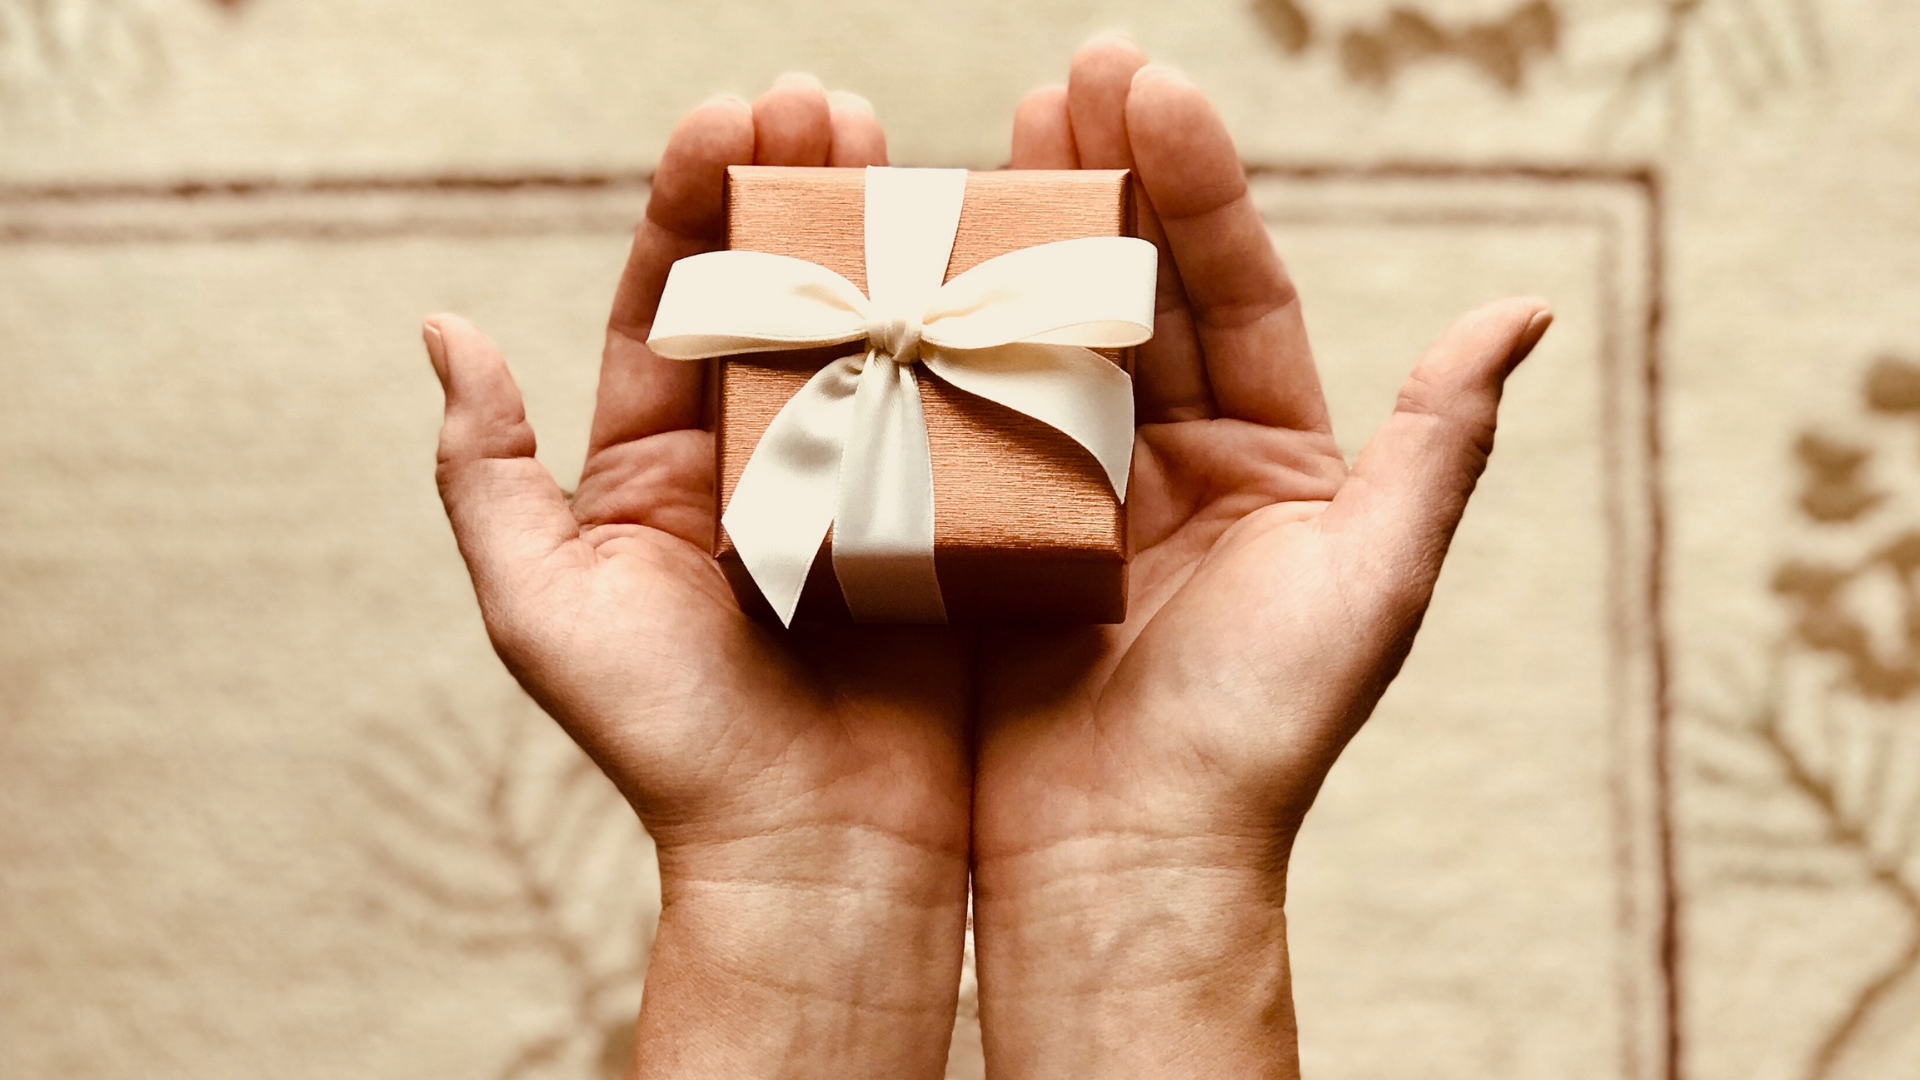 New research identifies the gifts employees want most from their employers